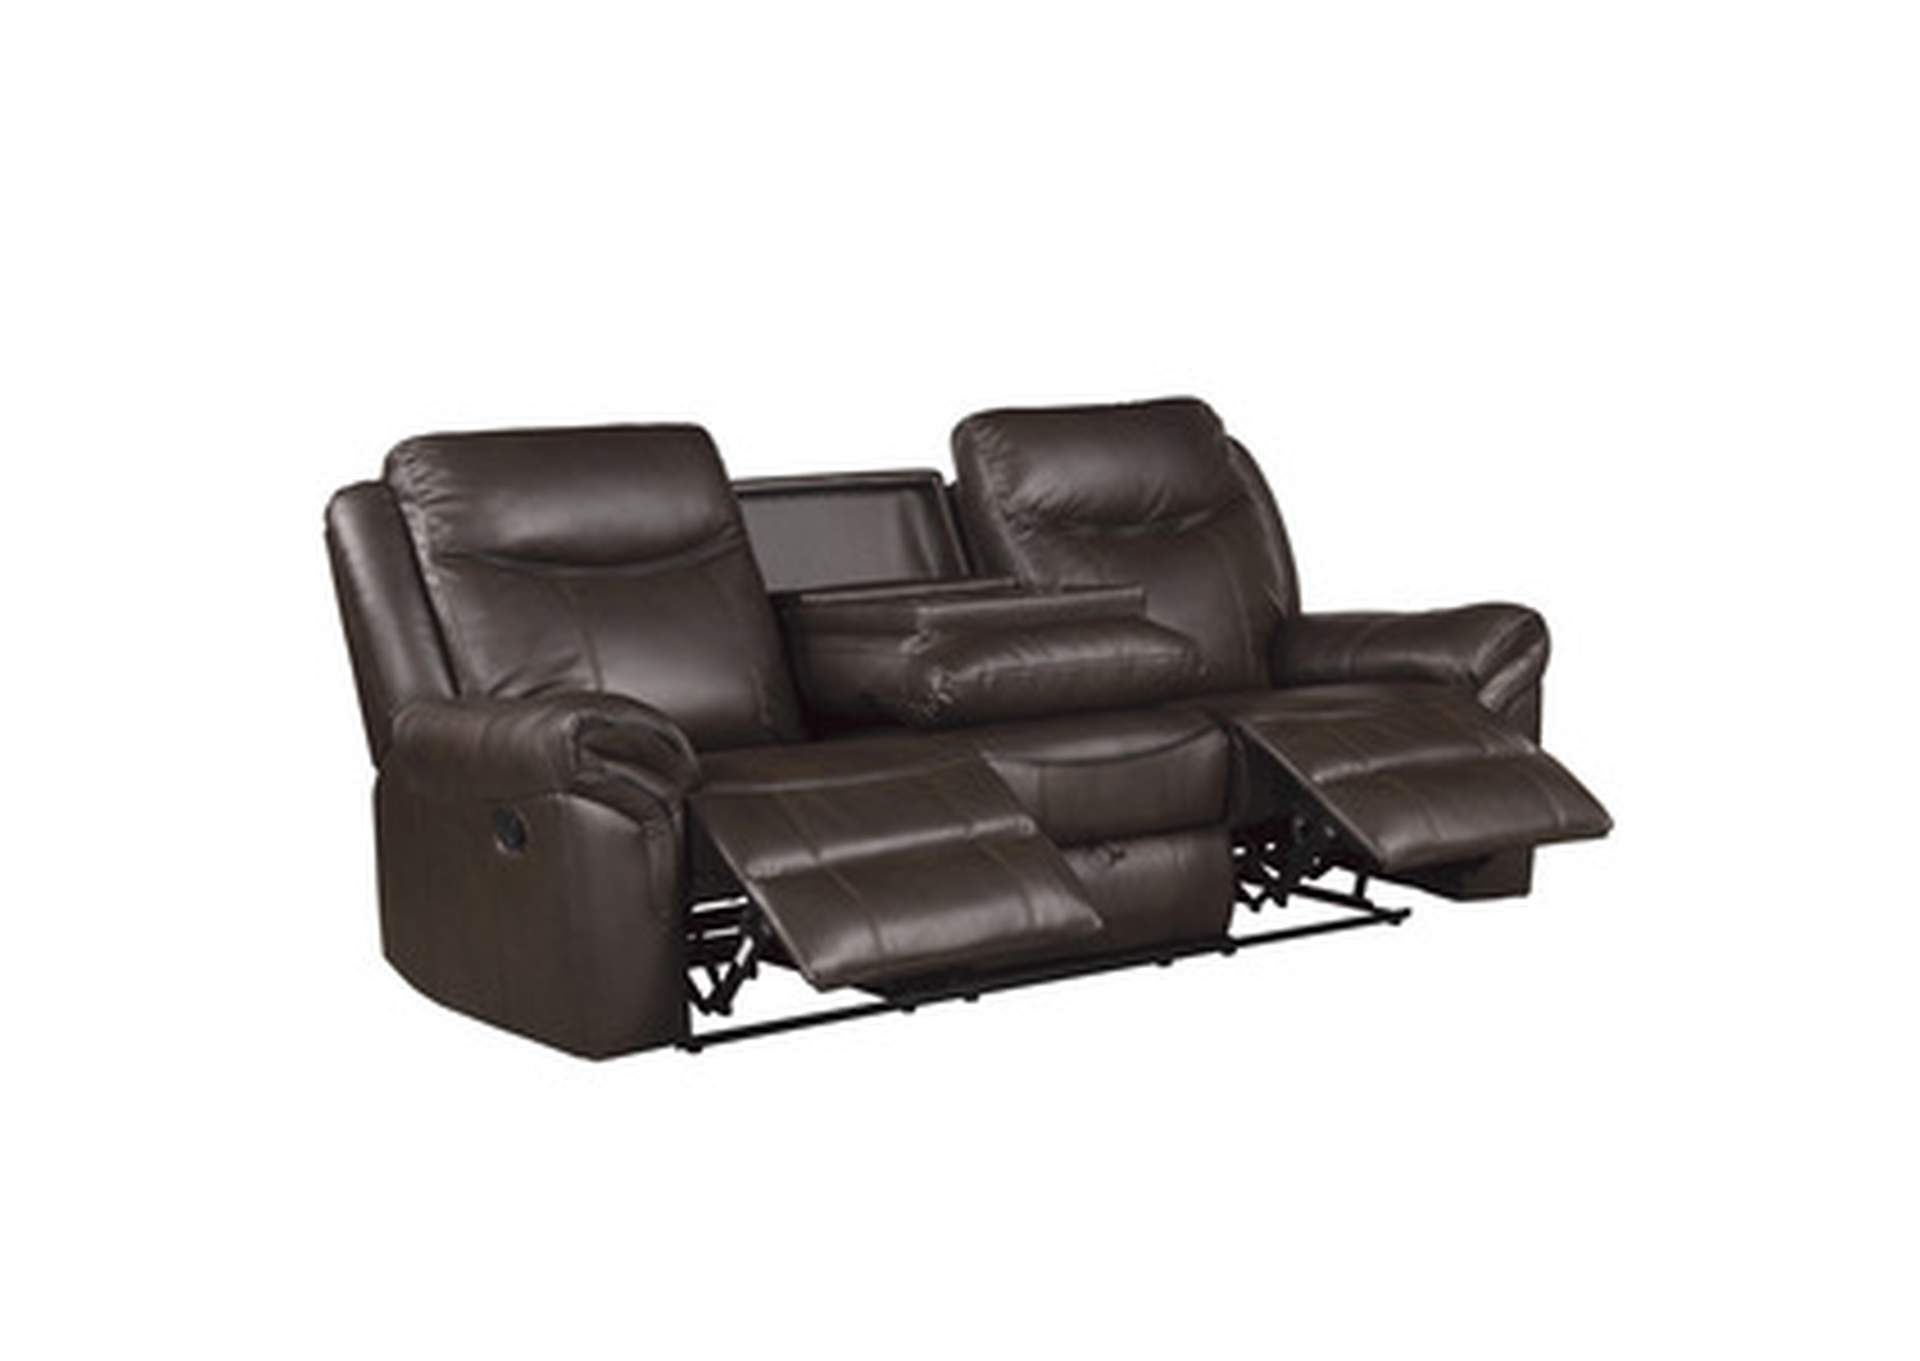 Aram Double Reclining Sofa With Center Drop-Down Cup Holders, Receptacles, Hidden Drawer And Usb Ports,Homelegance